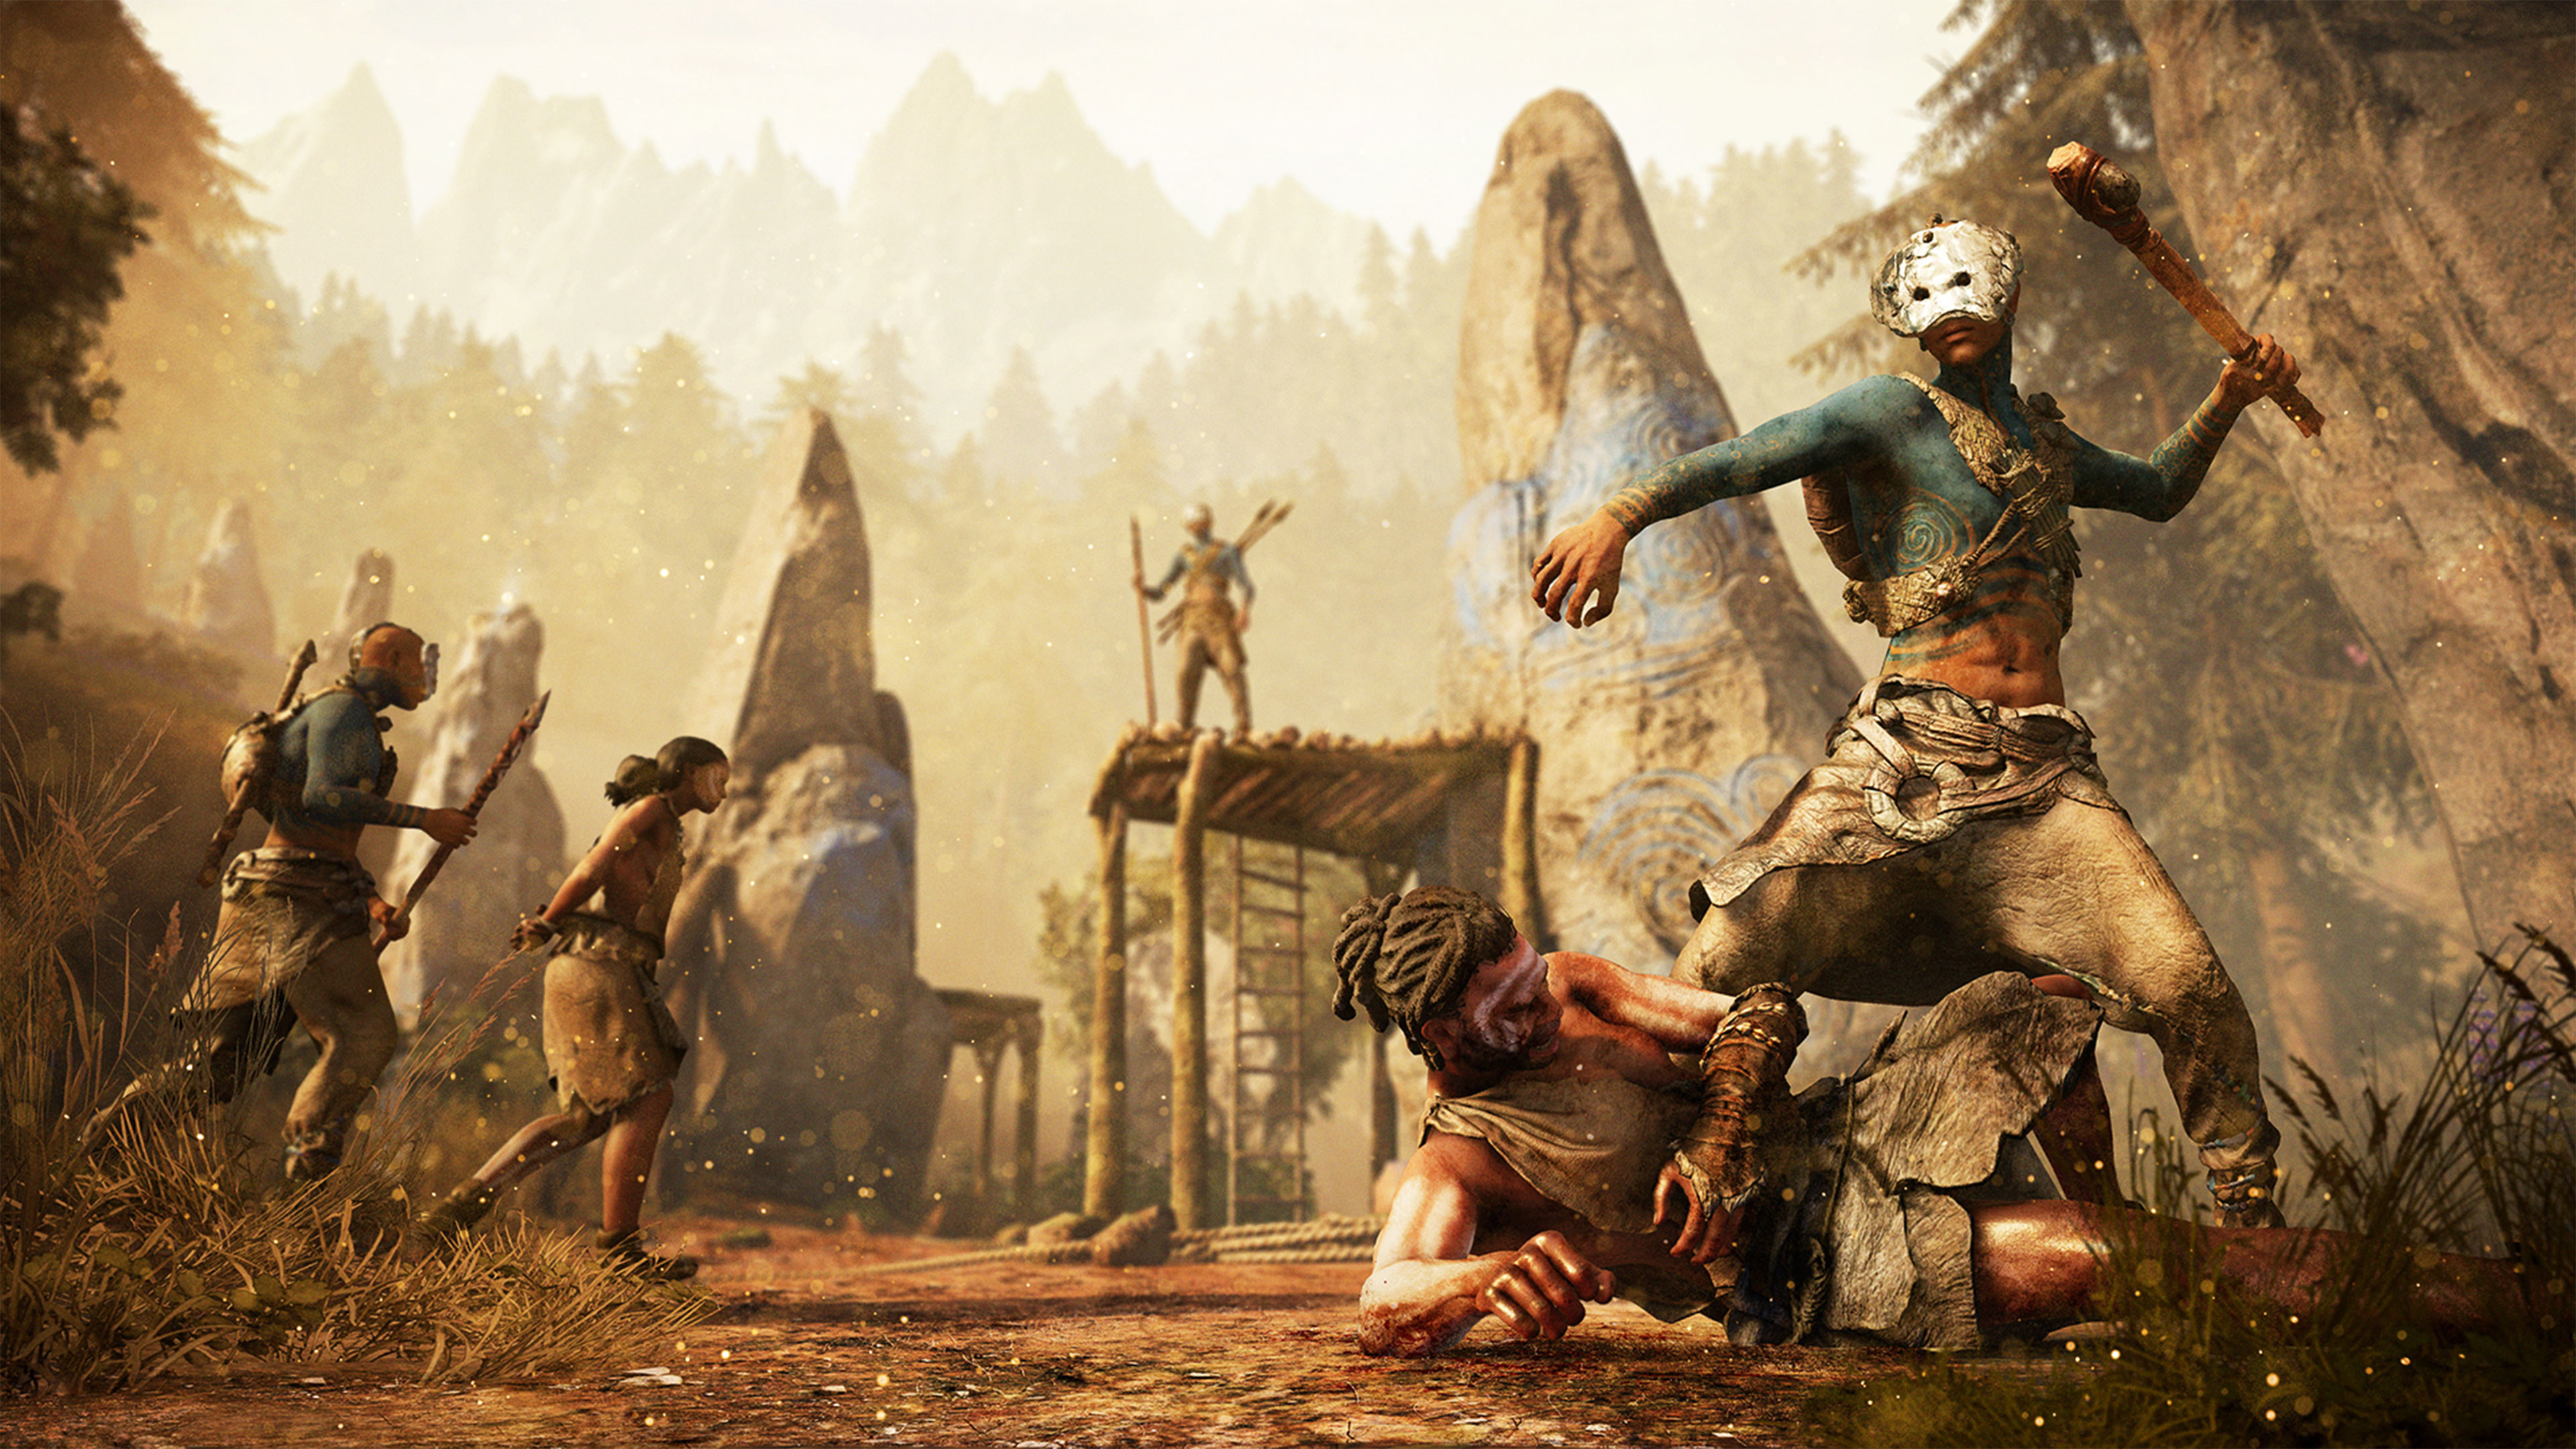 3840x2160 ... See Oros in 4K With These Far Cry Primal Screens - UbiBlog - UbisoftÂ®  Far Cry Primal Wallpapers ...